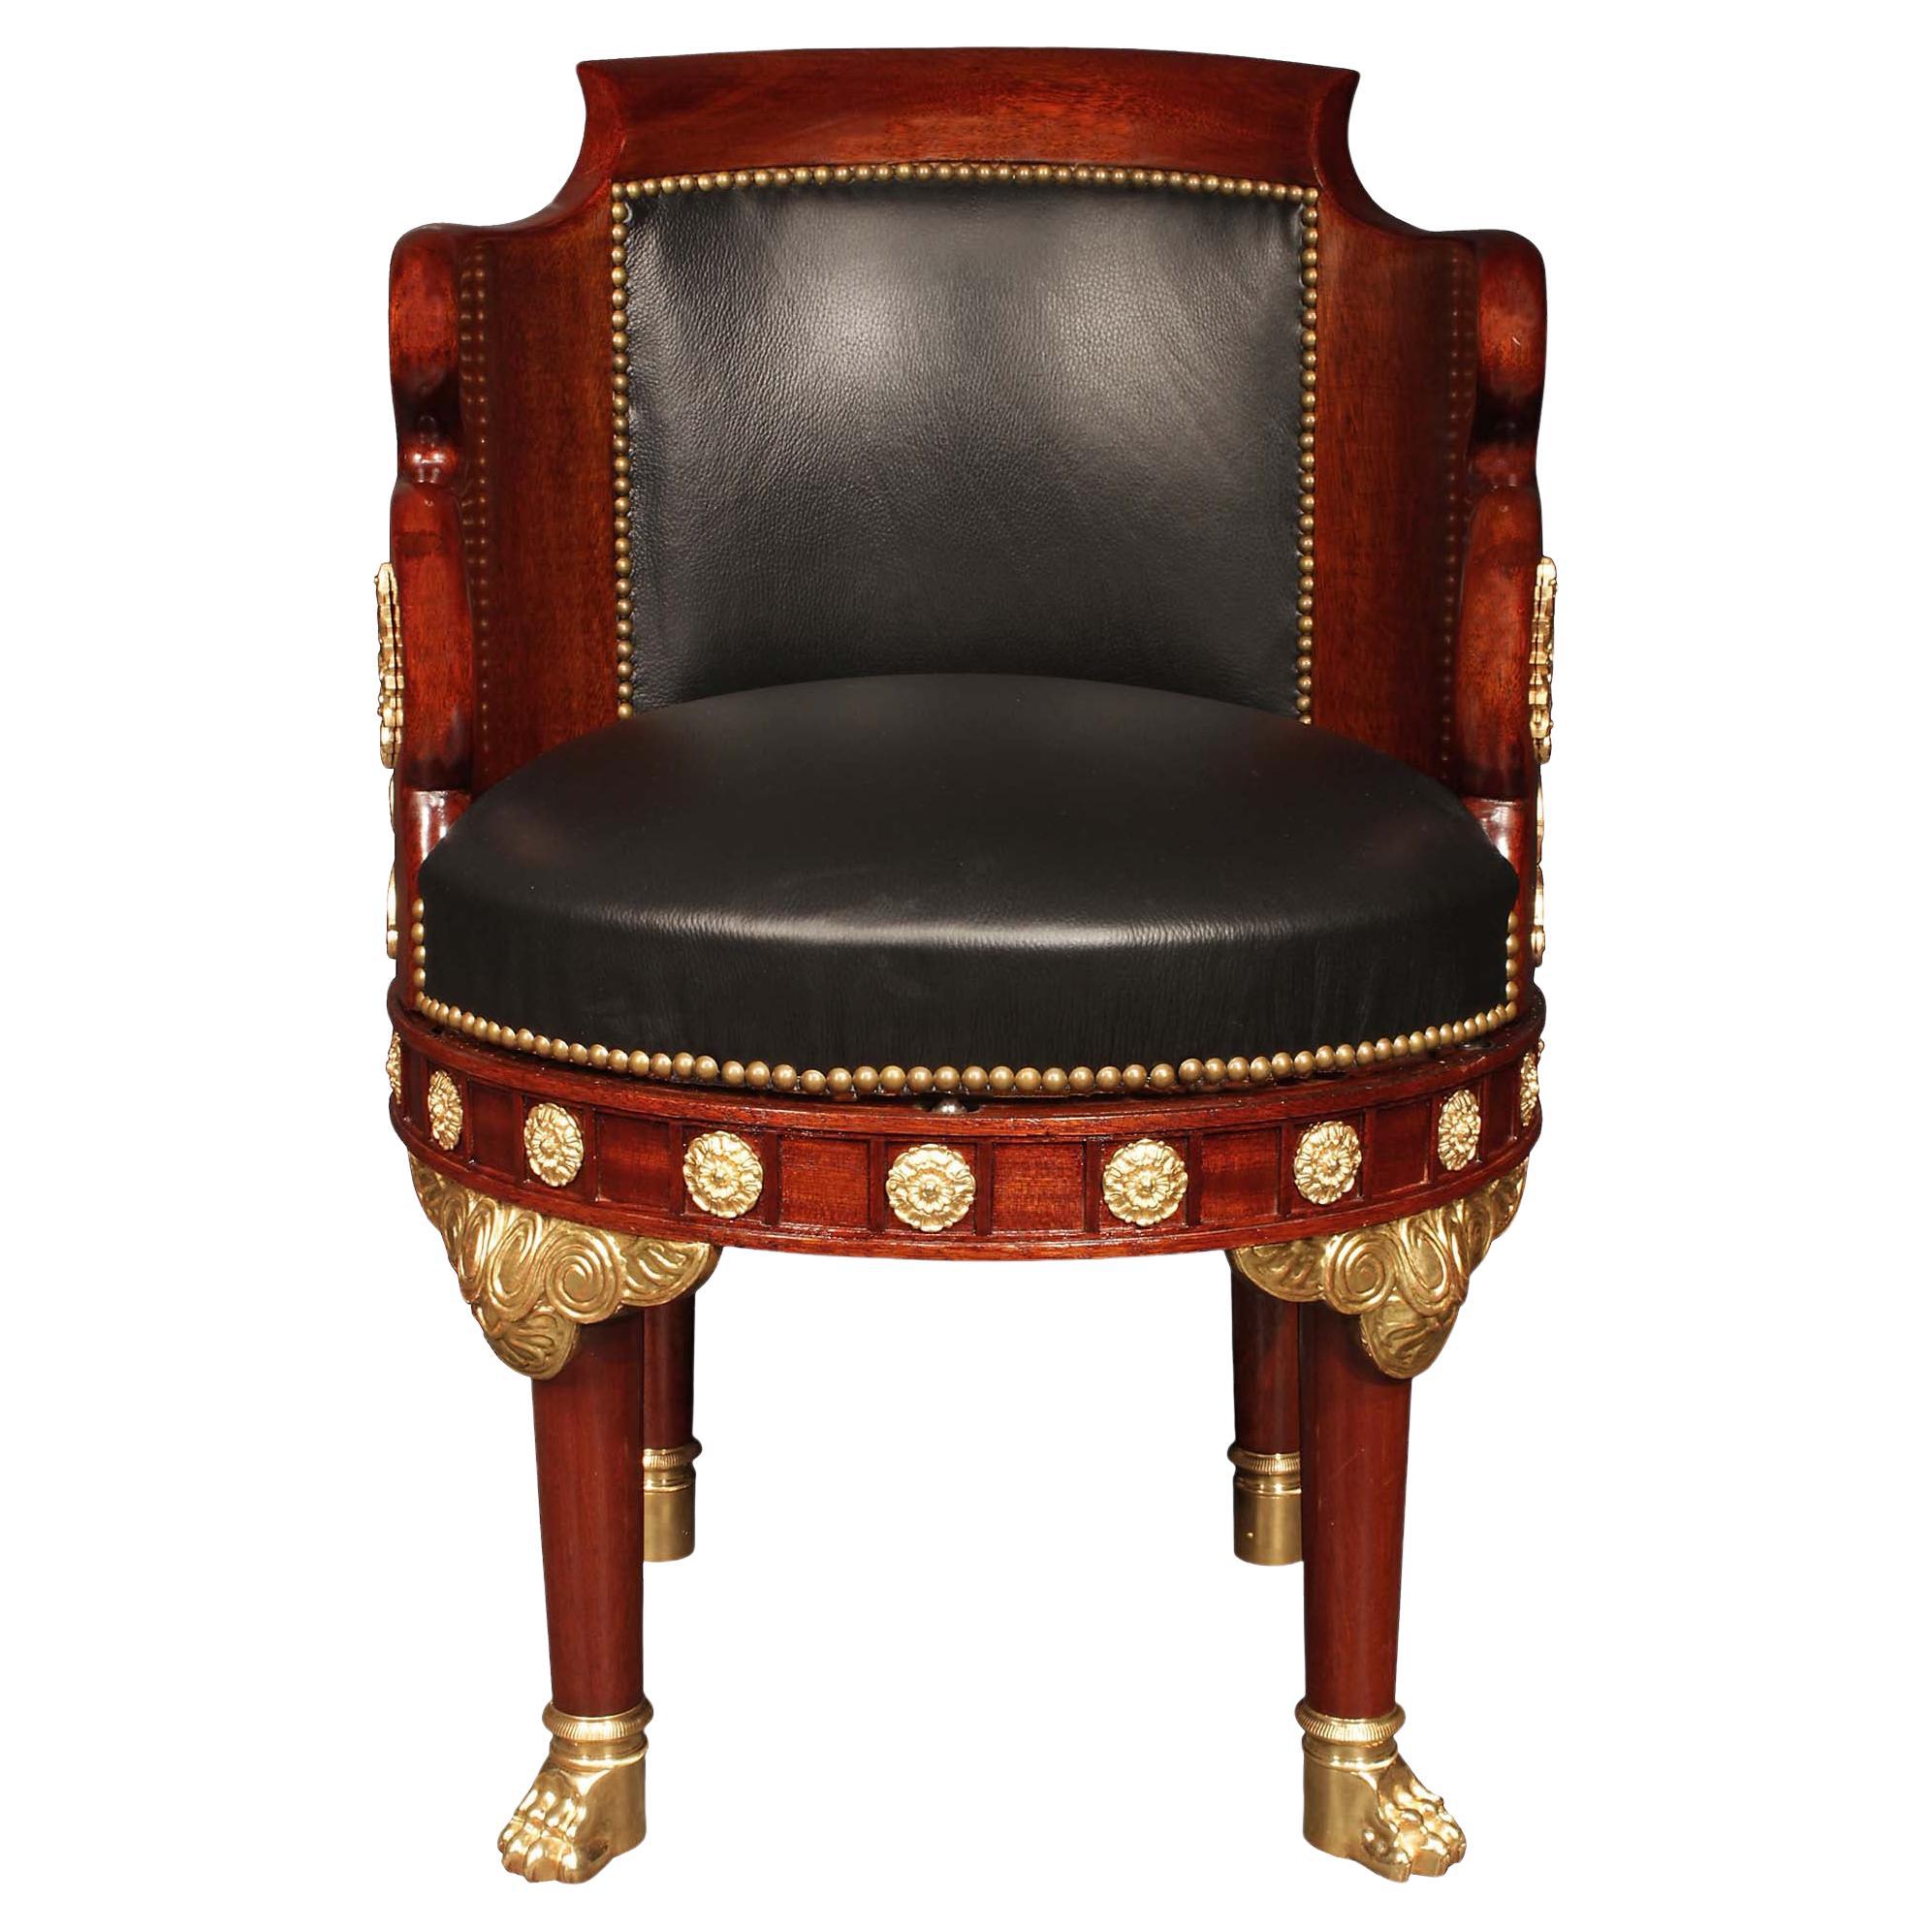 French 19th Century Empire Style Mahogany and Ormolu Desk Chair